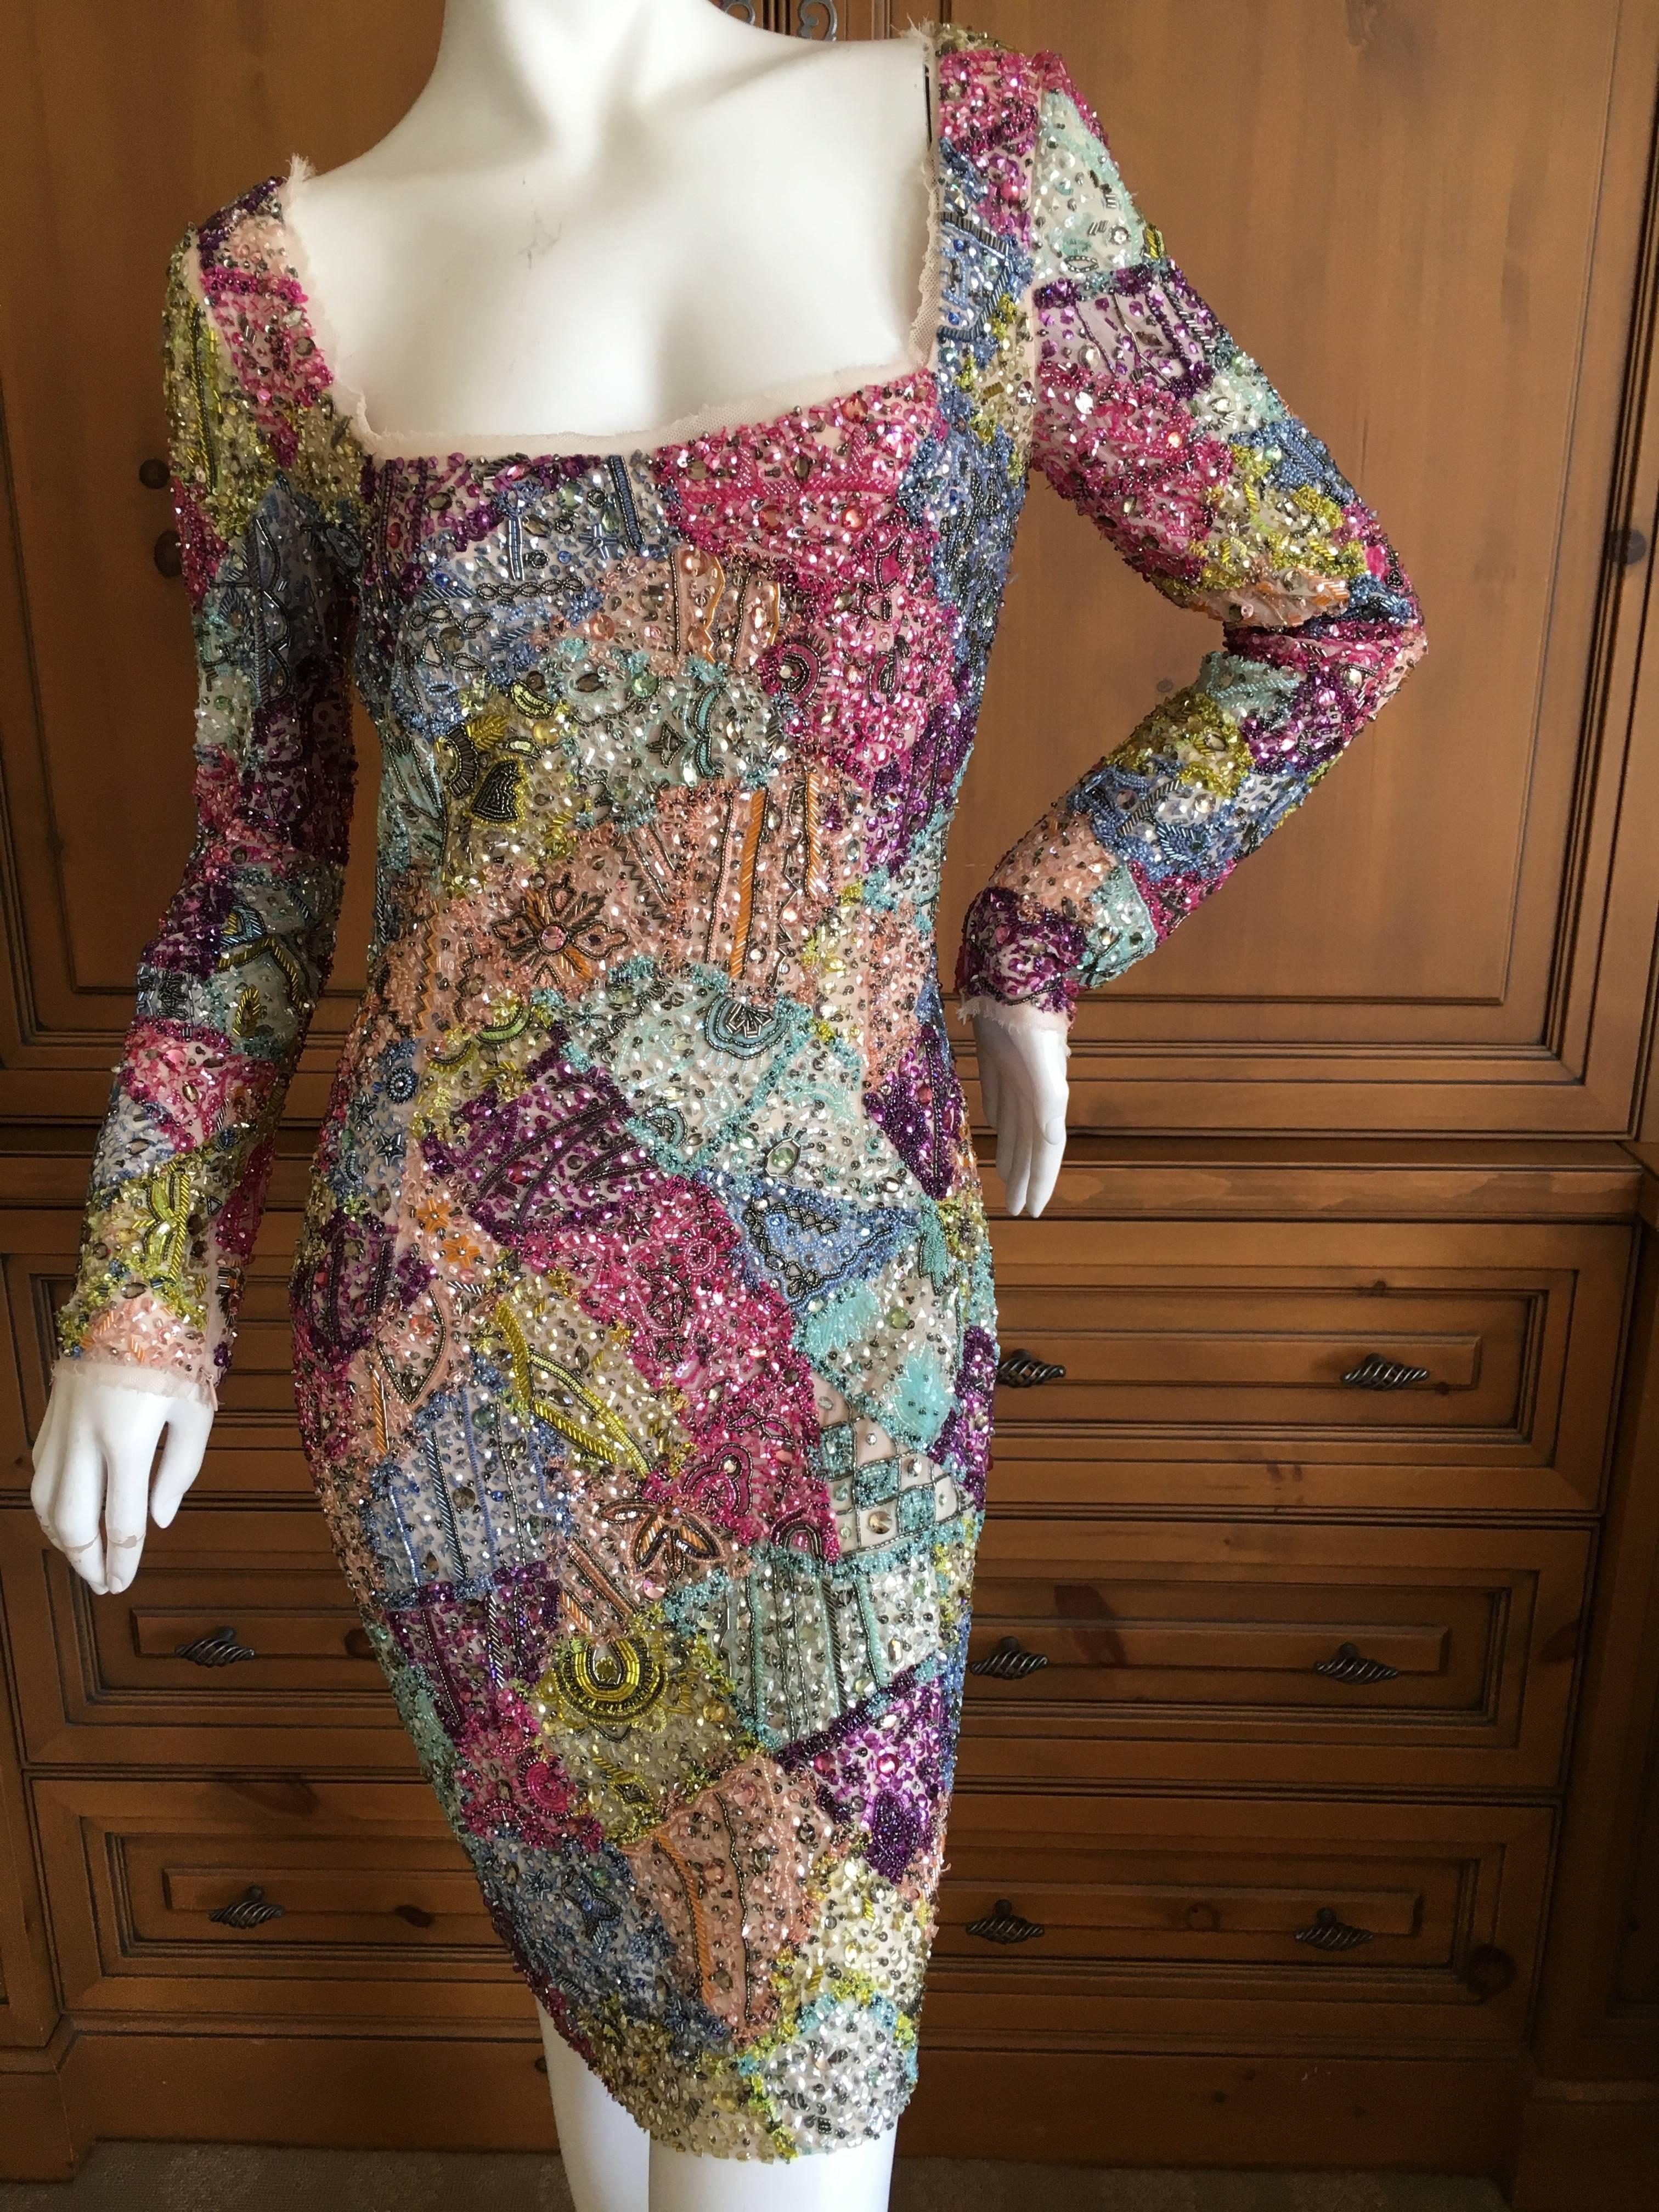 
Emilio Pucci Rare Embellished Cocktail Dress .
WOW 
I have never seen a completely embellished Pucci before, this is unreal.
Size 38
Bust  36" 
Waist 30" 
Hips 40' 
Length 36"
 Excellent New condition